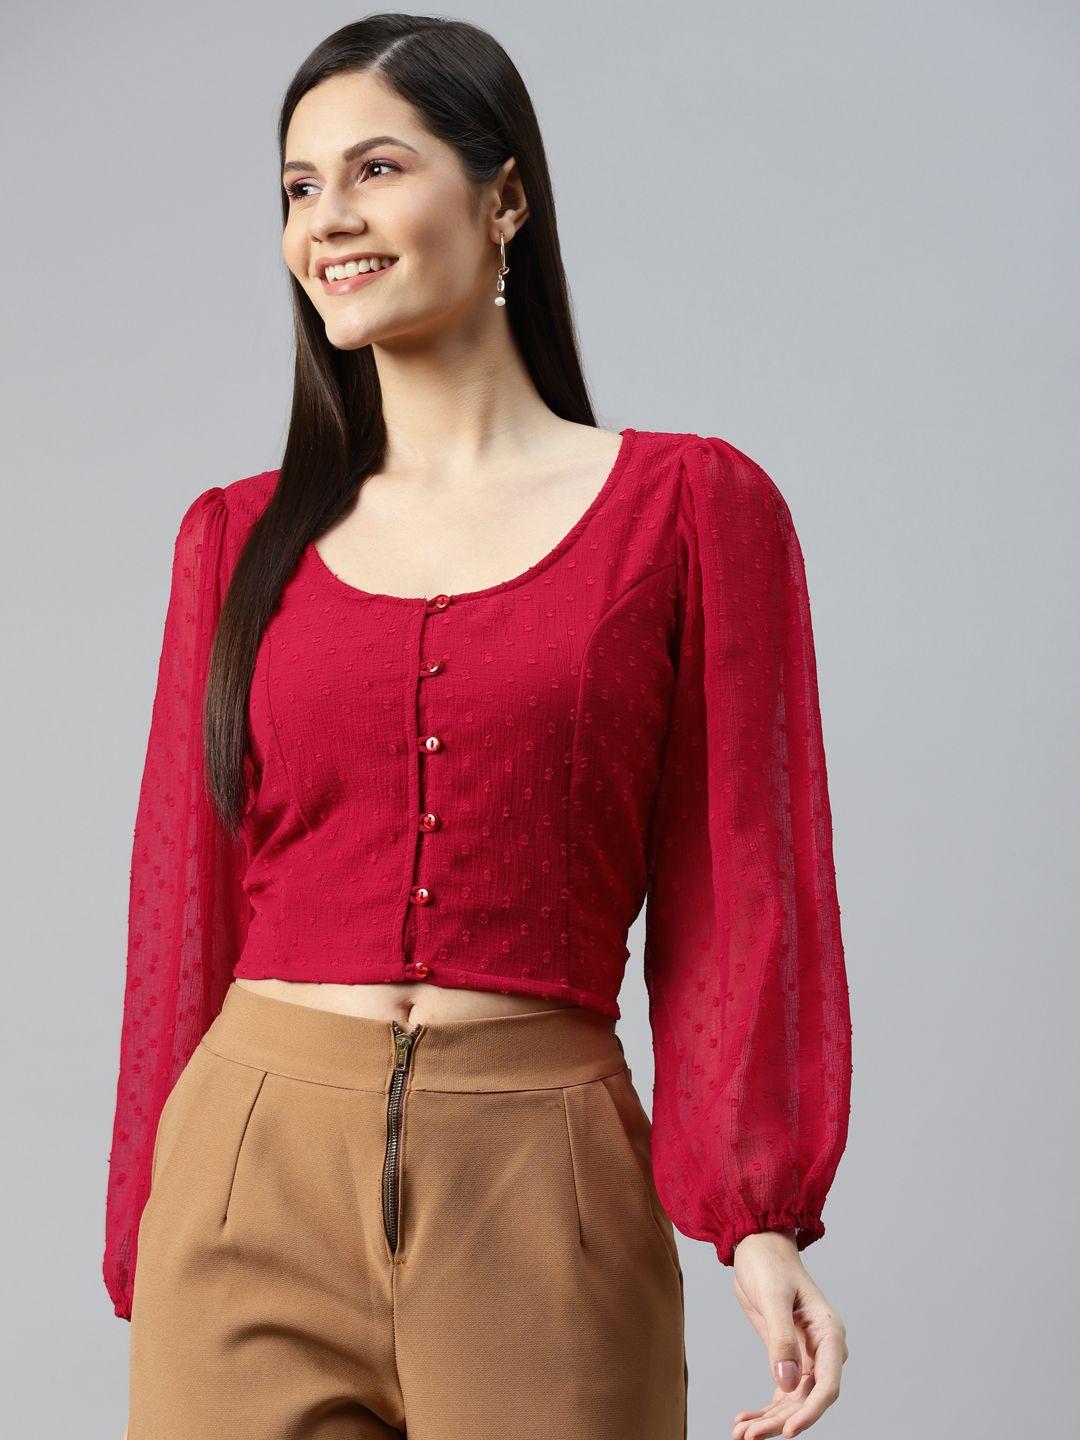 pluss red shirt style crop top